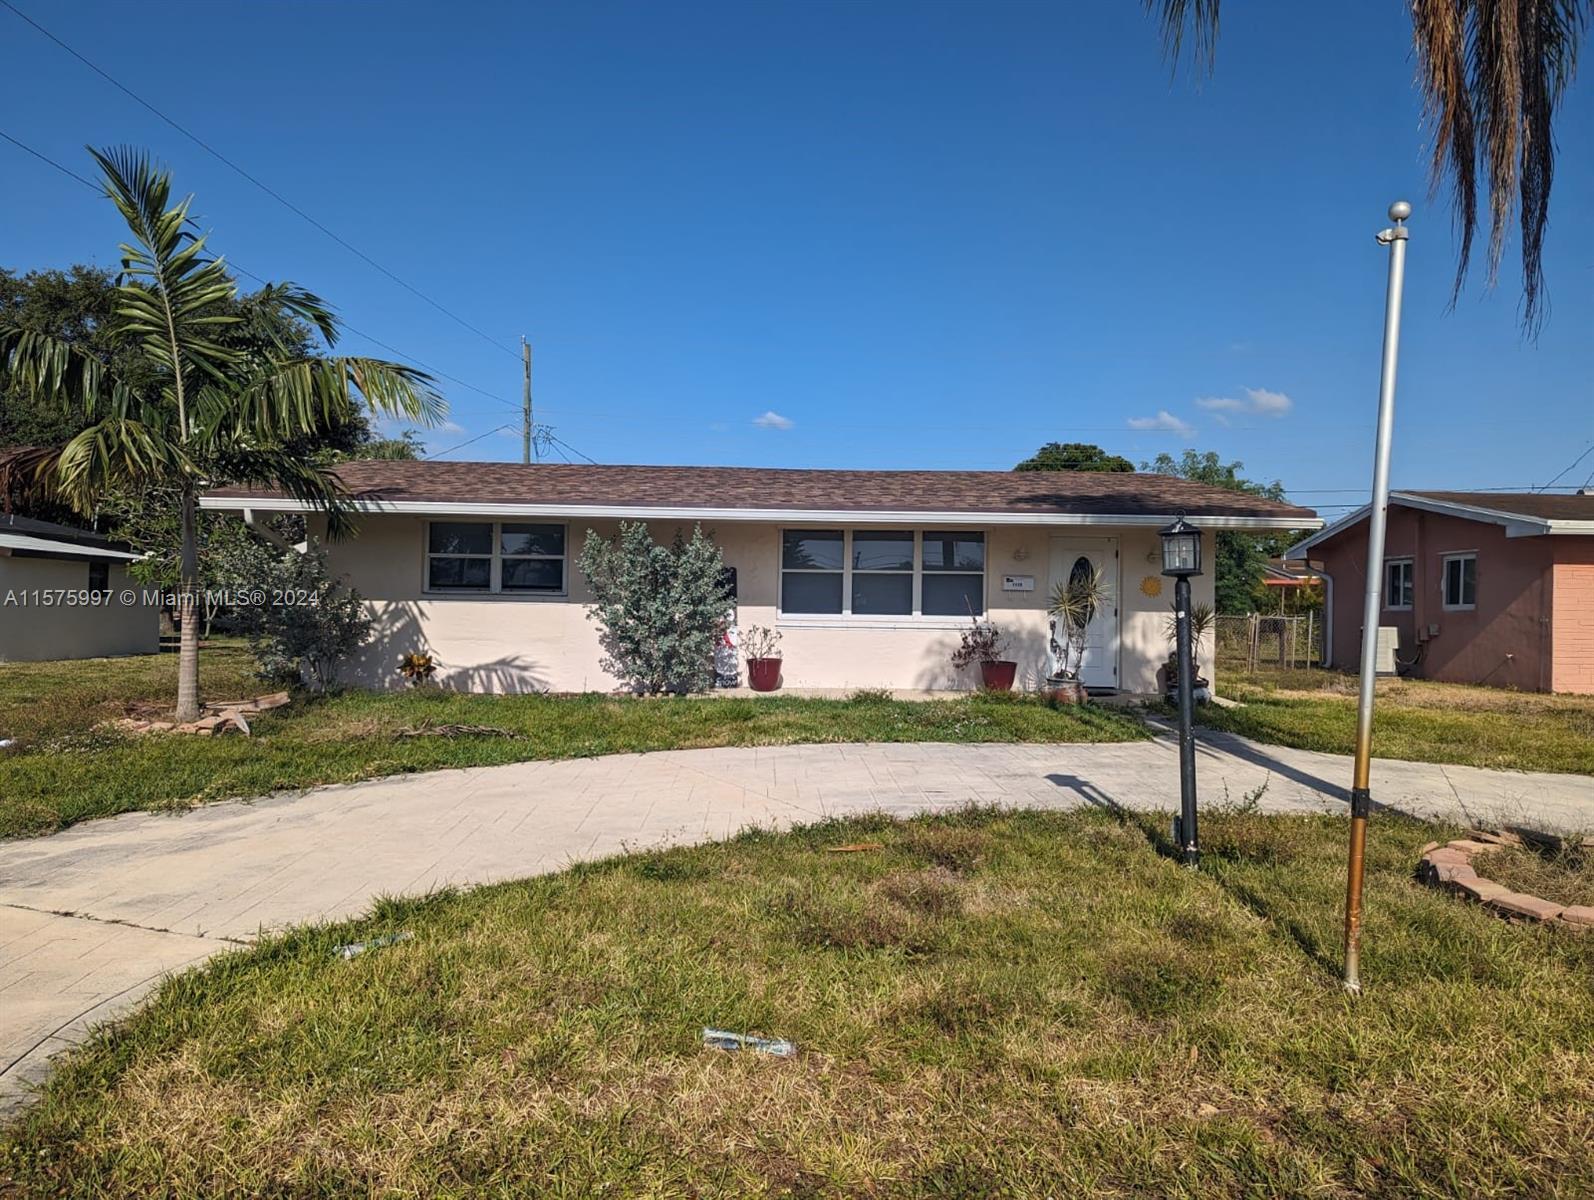 Photo of 1410 NW 79th Ter in Pembroke Pines, FL